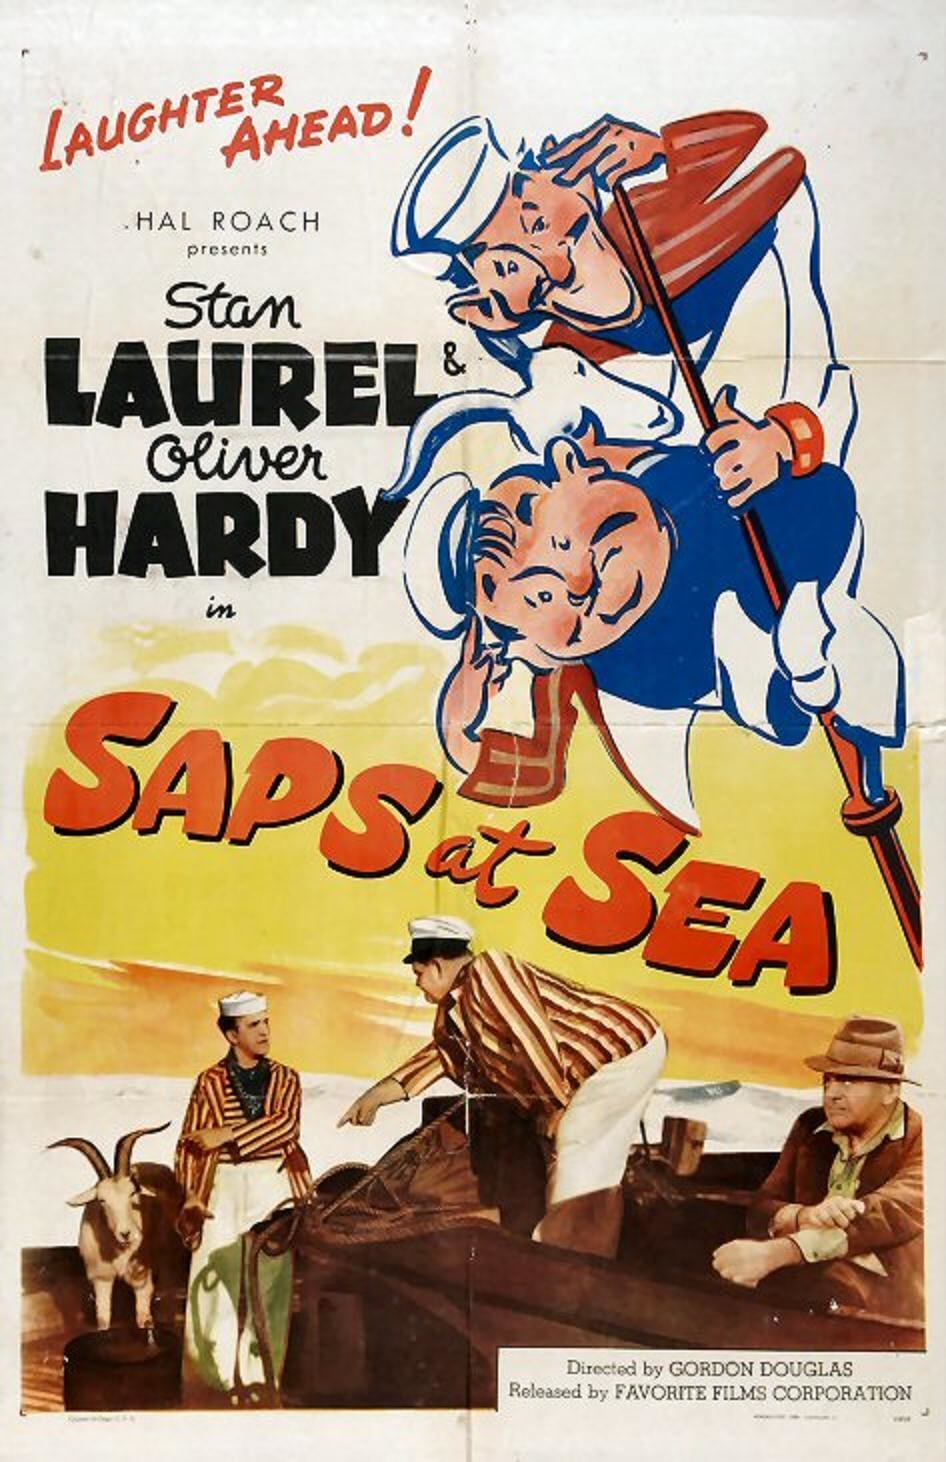 Poster for the movie "Saps at Sea"